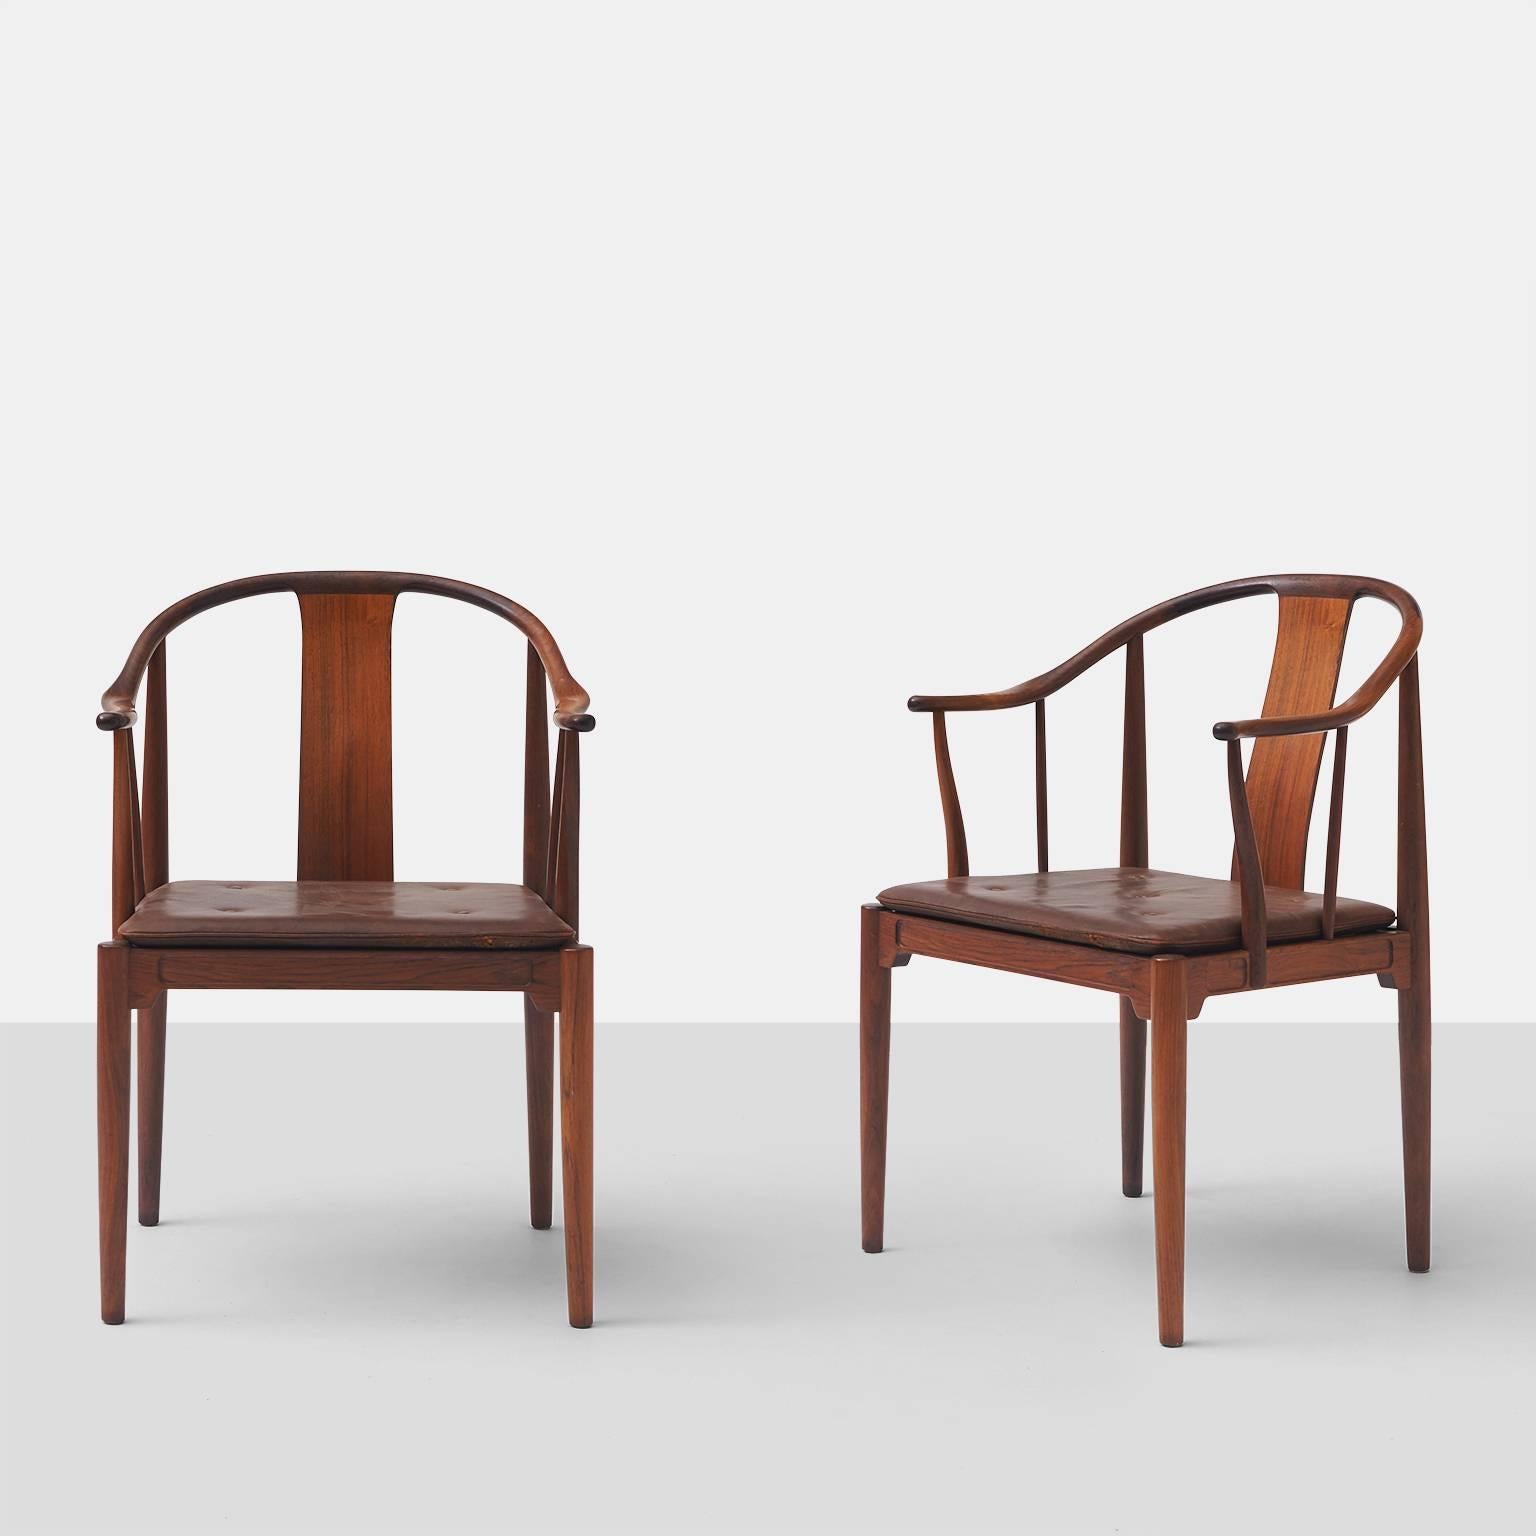 Pair of rosewood “China” chairs by Hans J Wegner
A pair of lounge chairs in wood with loose seat cushion upholstered in buttoned brown leather. Designed in 1944. Produced by Fritz Hansen. Signs of wear on the leather. Literature: Hans J. Wegner, ‘En